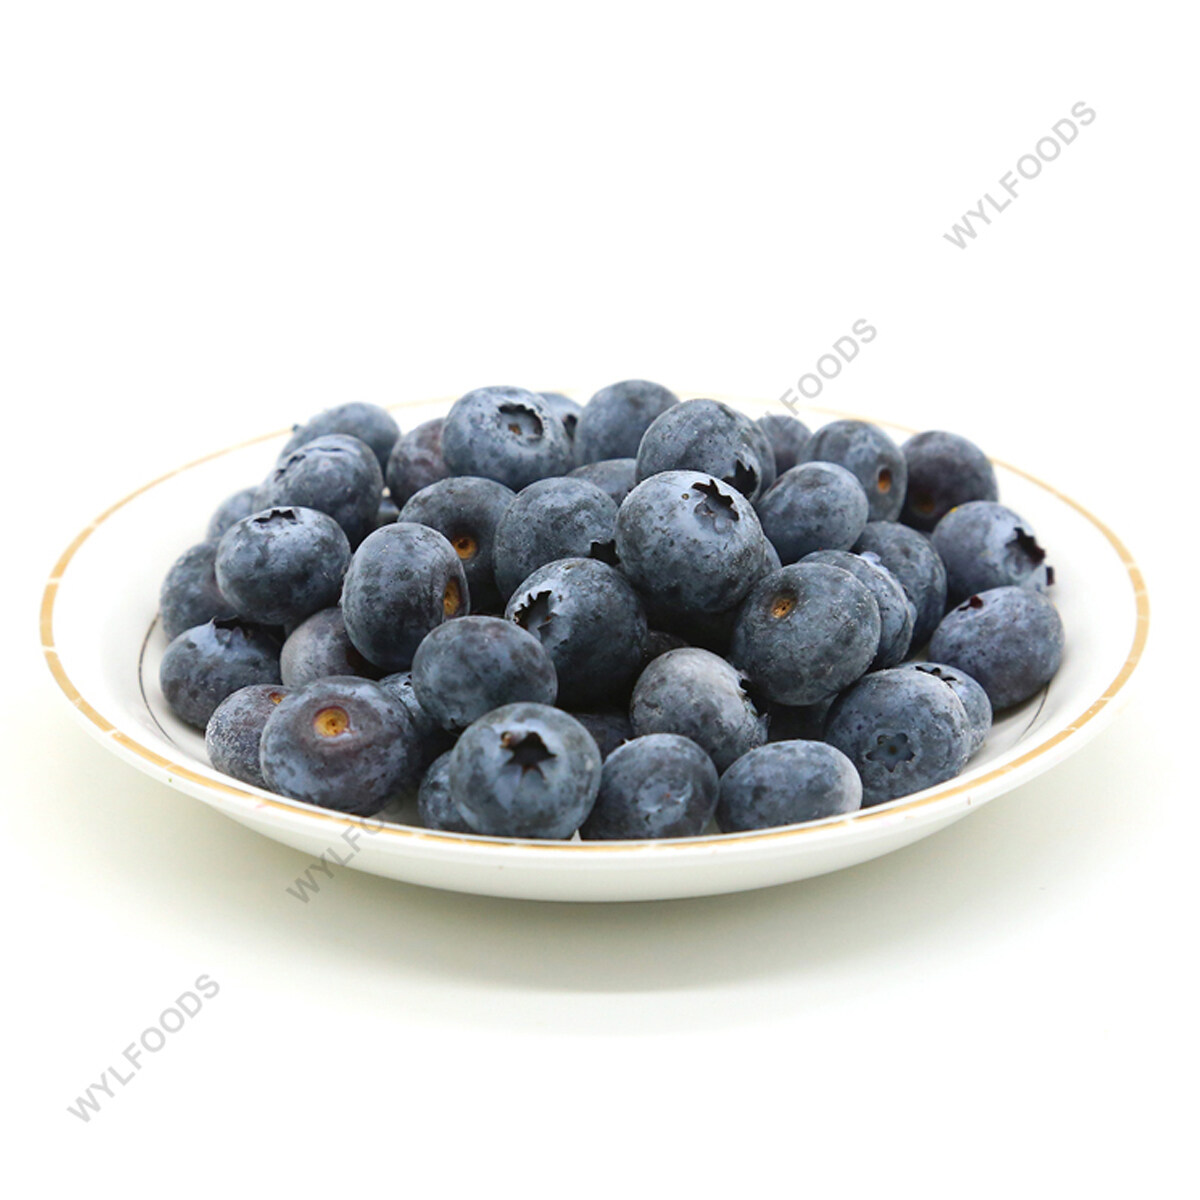 BRC-A Approved 12-16mm IQF Blueberries 15% Brix Whole Frozen Blueberry